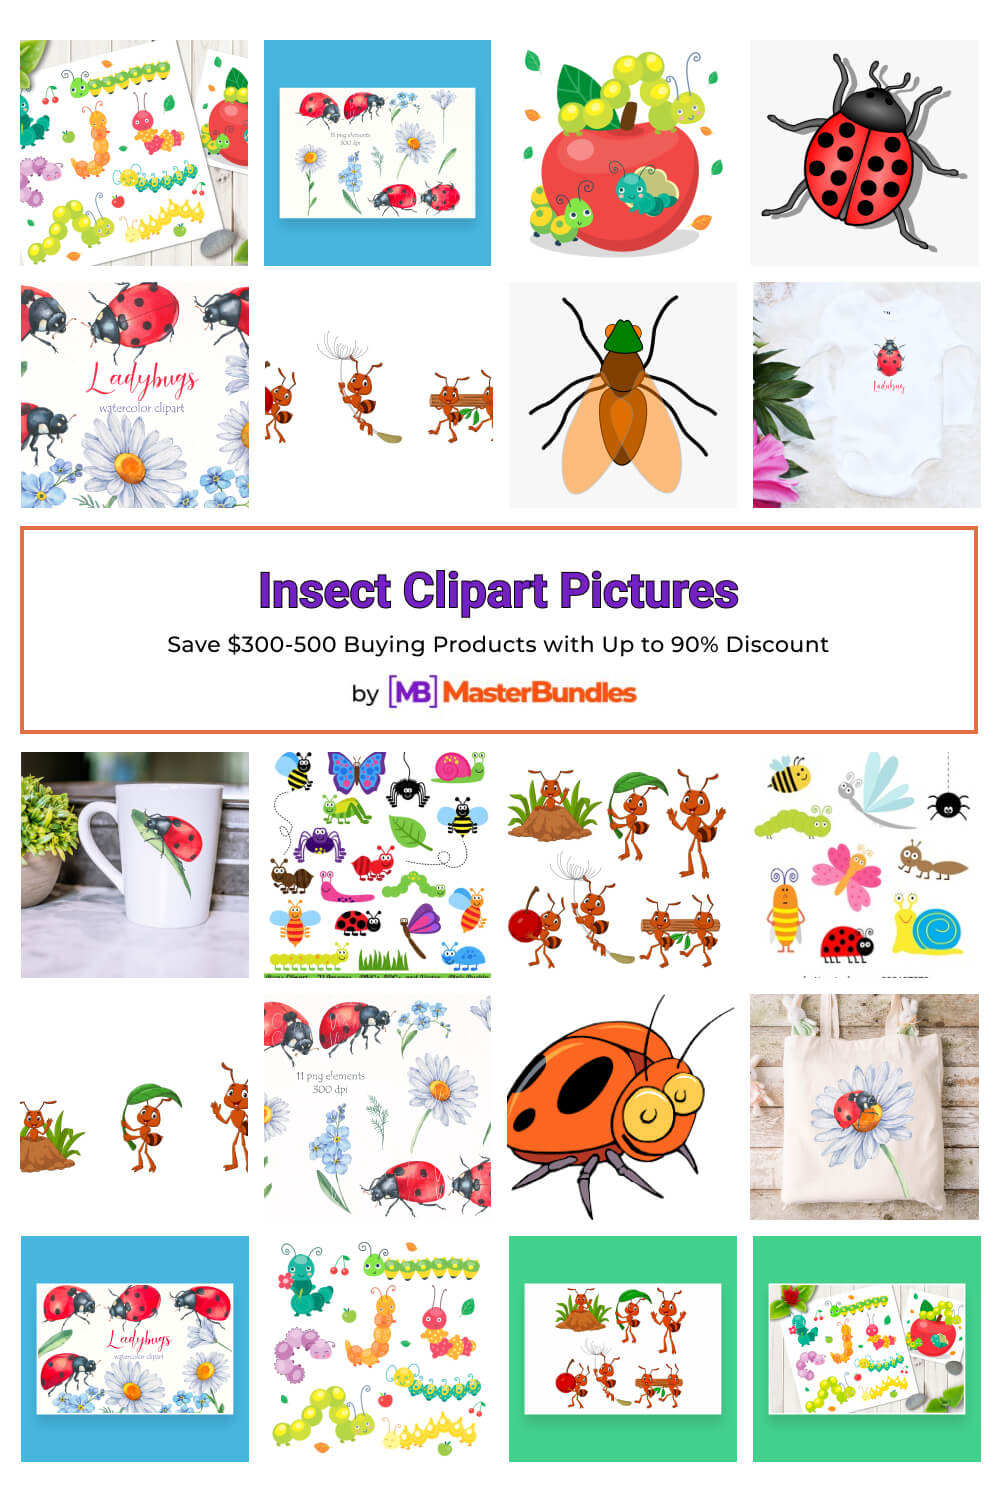 insect clipart pictures pinterest image.